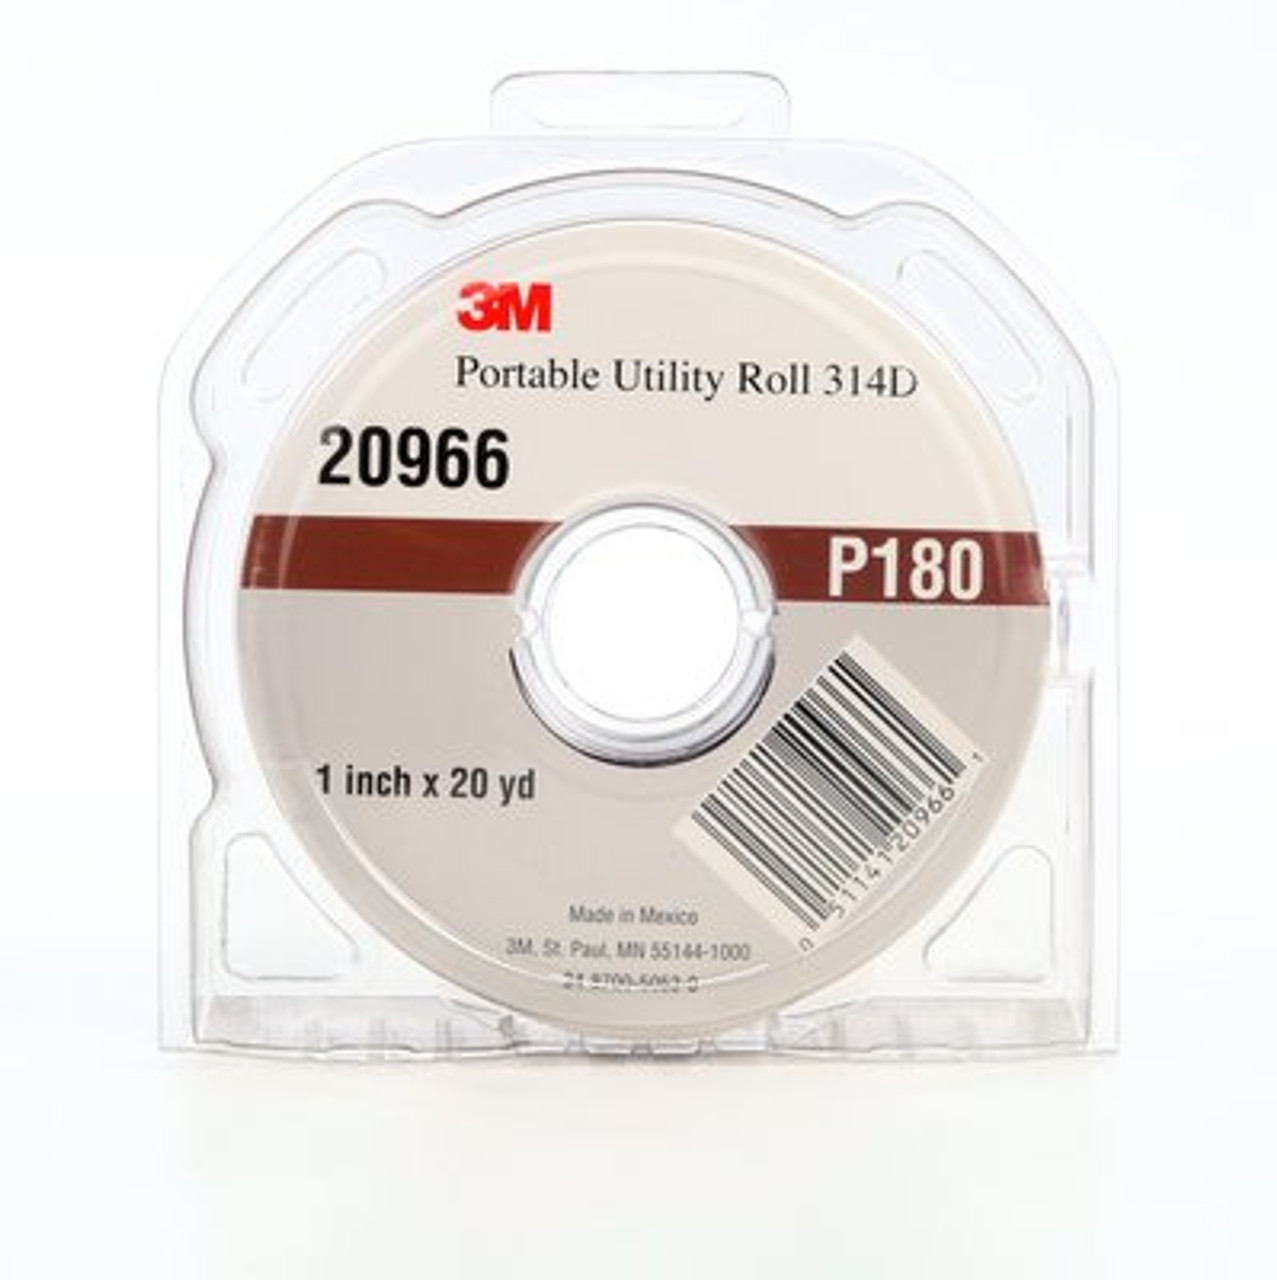 3M™ Portable Utility Cloth Roll 314D, 1 in x 20 yd P180 J-weight